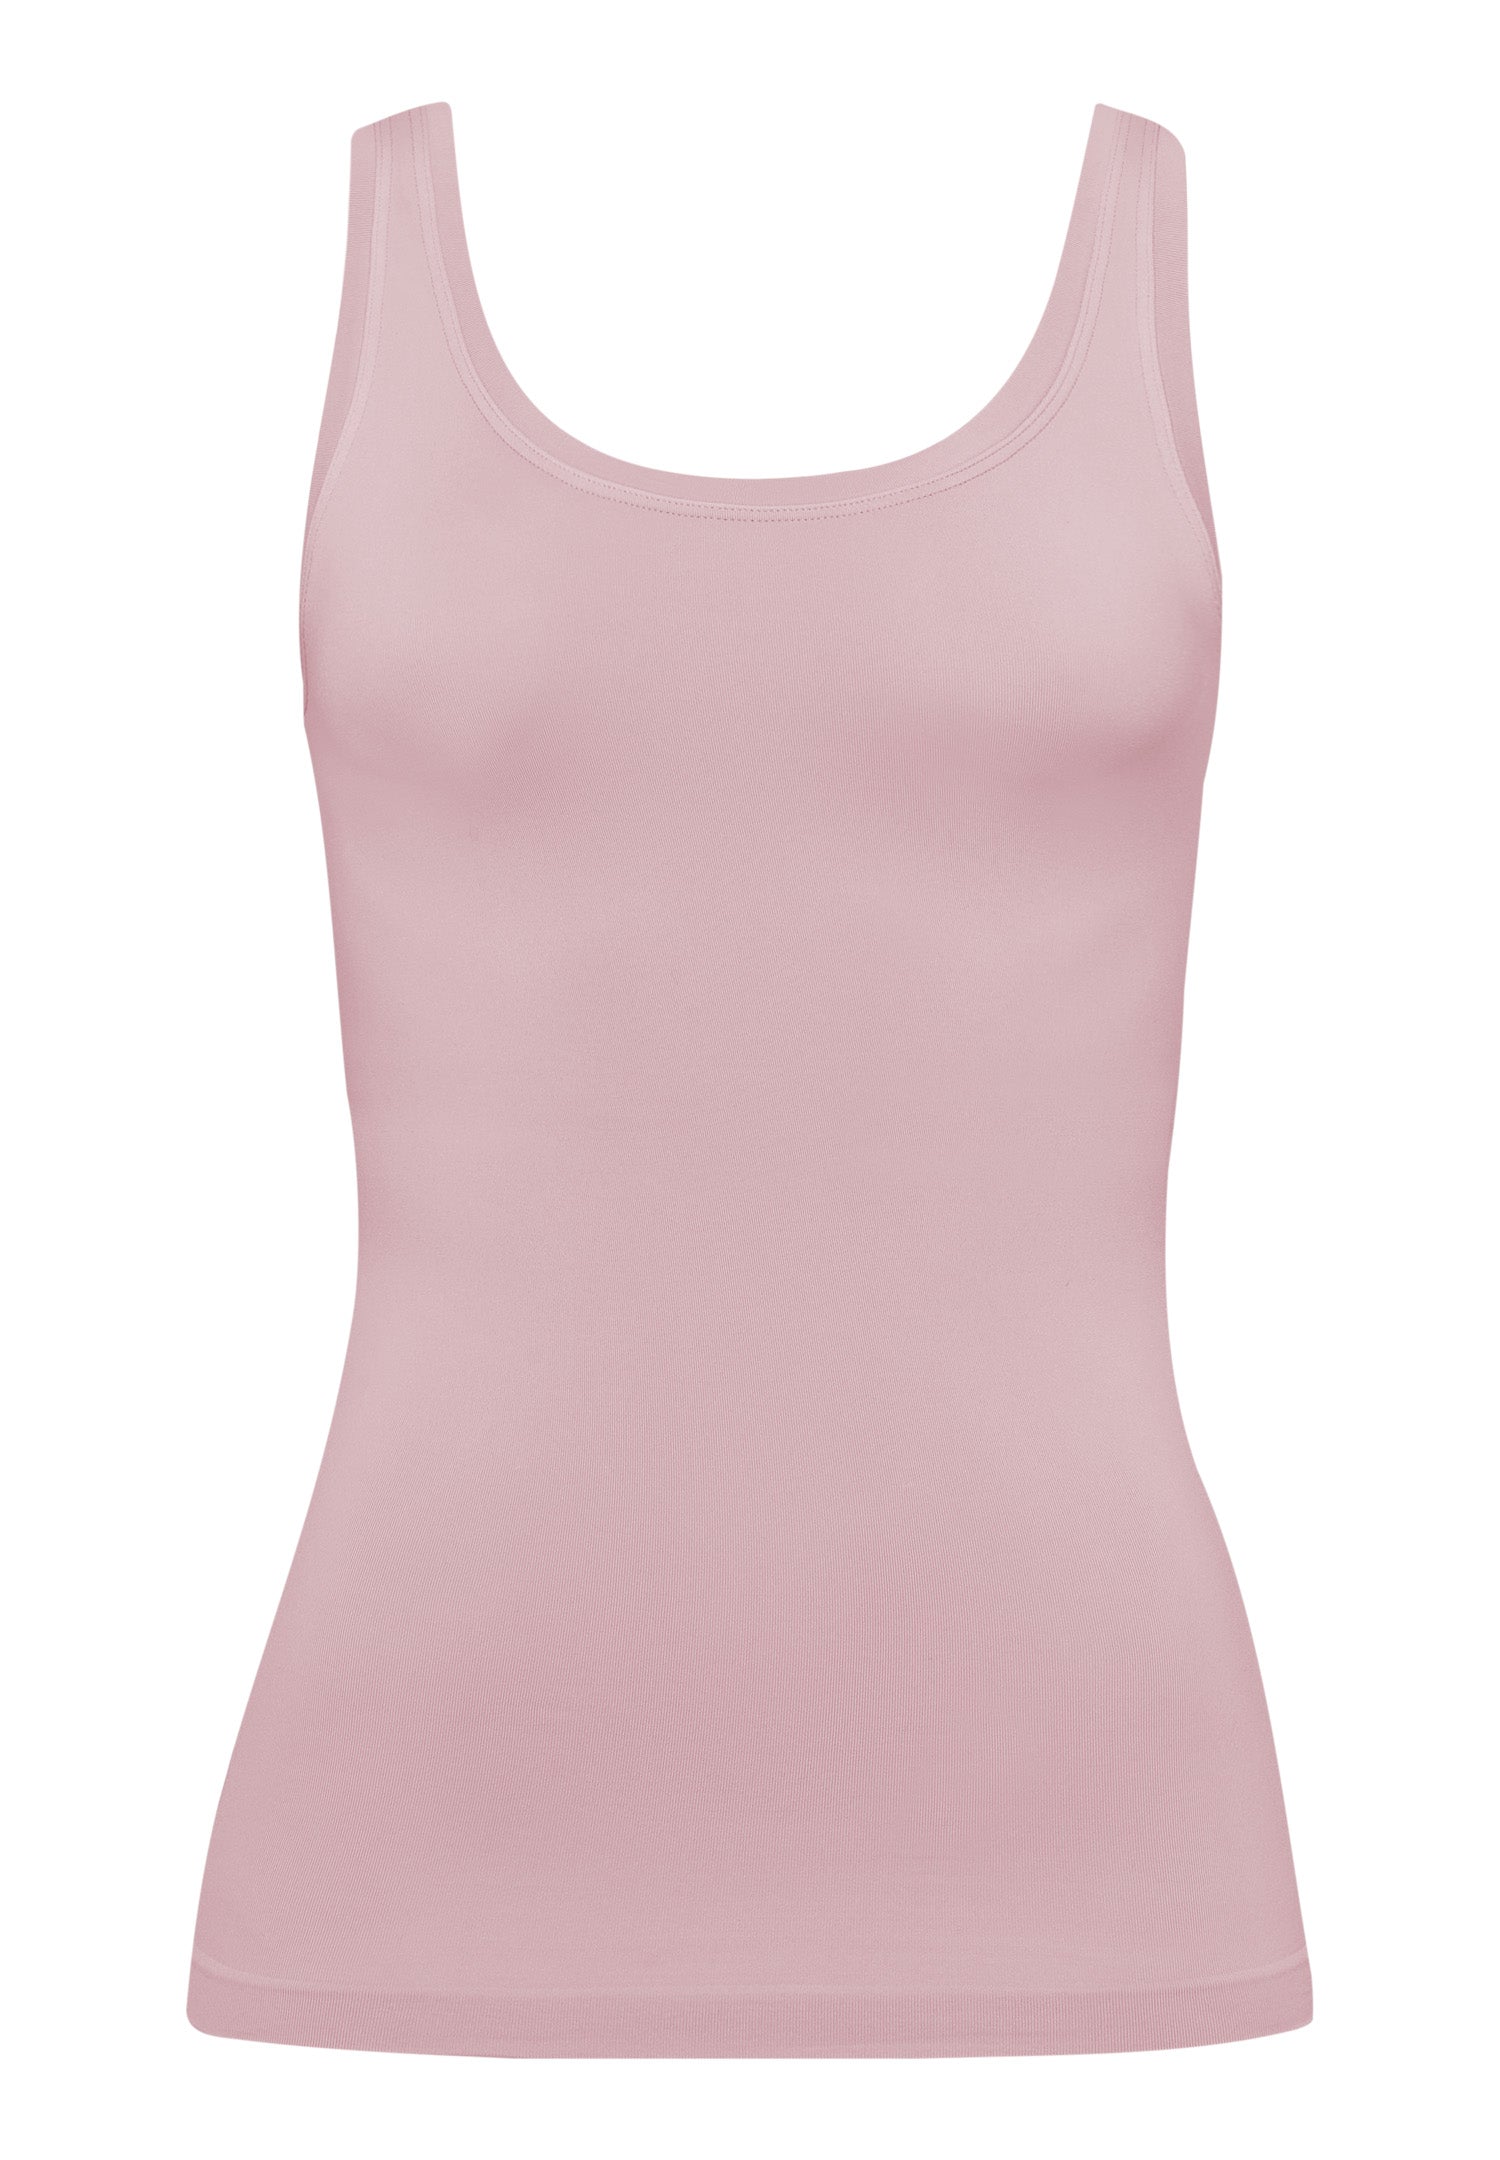 71814 Touch Feeling Tank Top - 1499 Crepe Pink